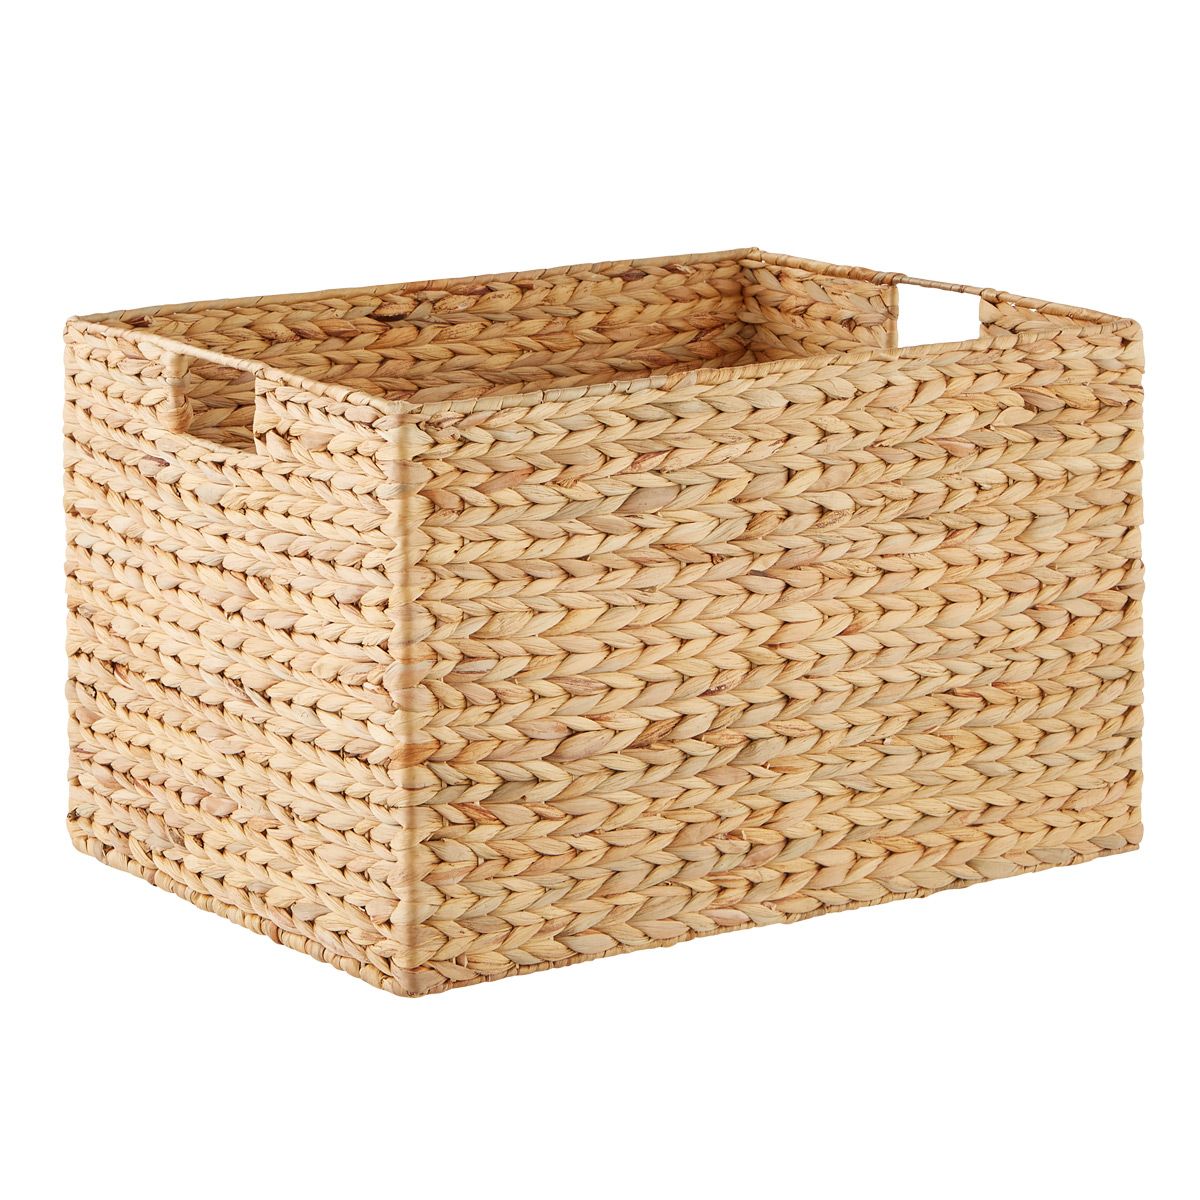 X-Large Water Hyacinth Bin Natural | The Container Store